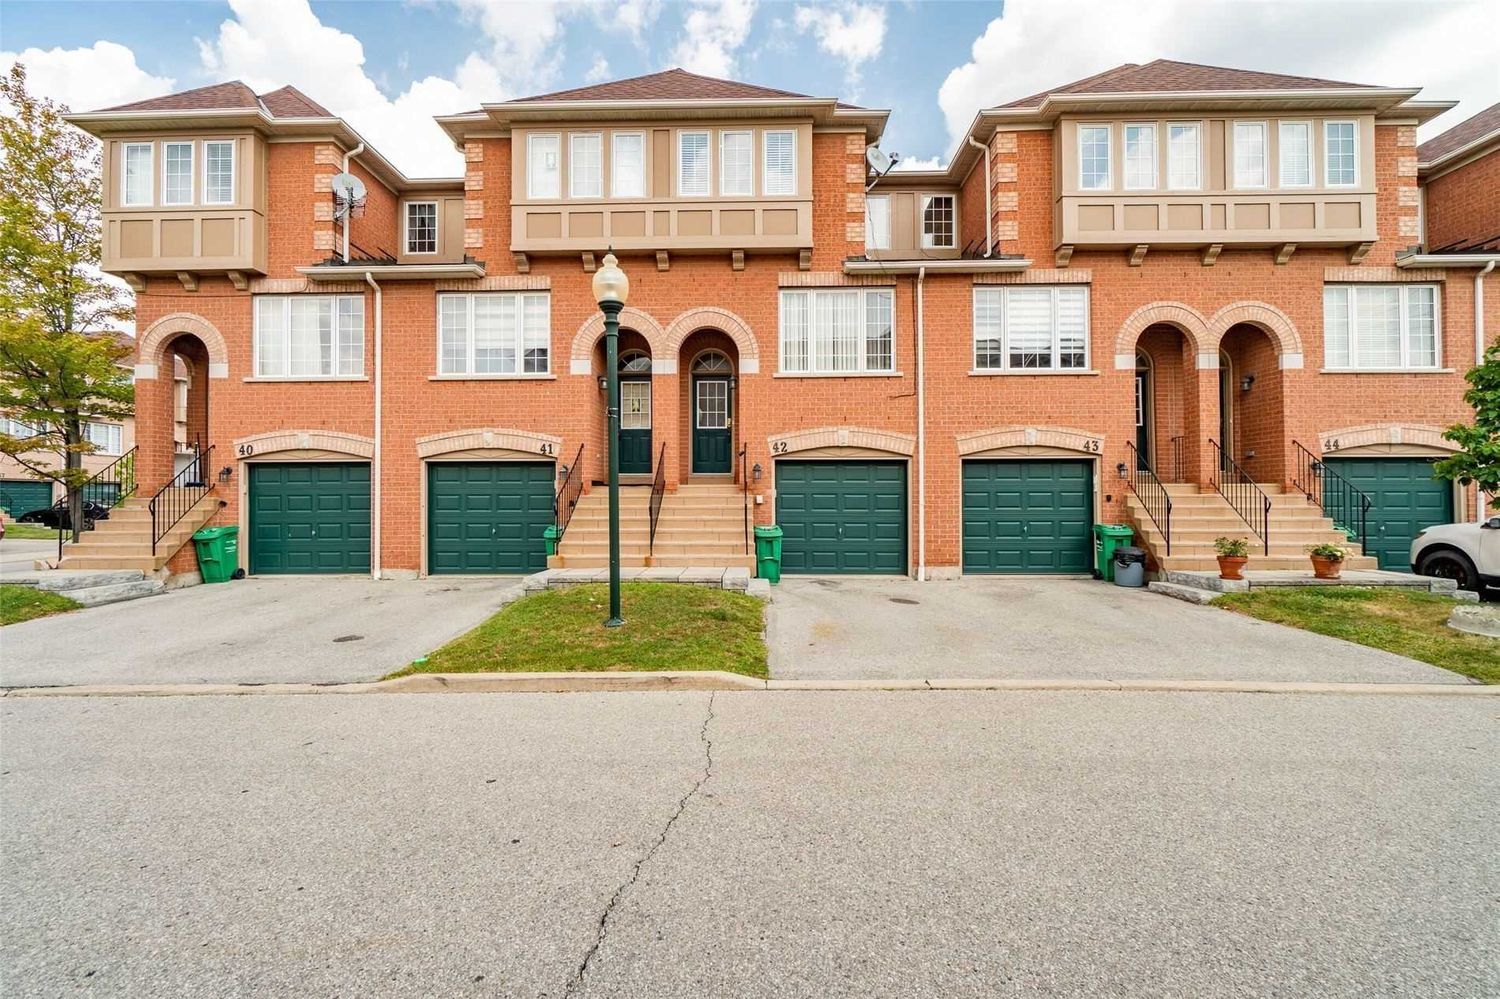 3020 Cedarglen Gate. Cedarglen Gate Townhomes is located in  Mississauga, Toronto - image #1 of 2